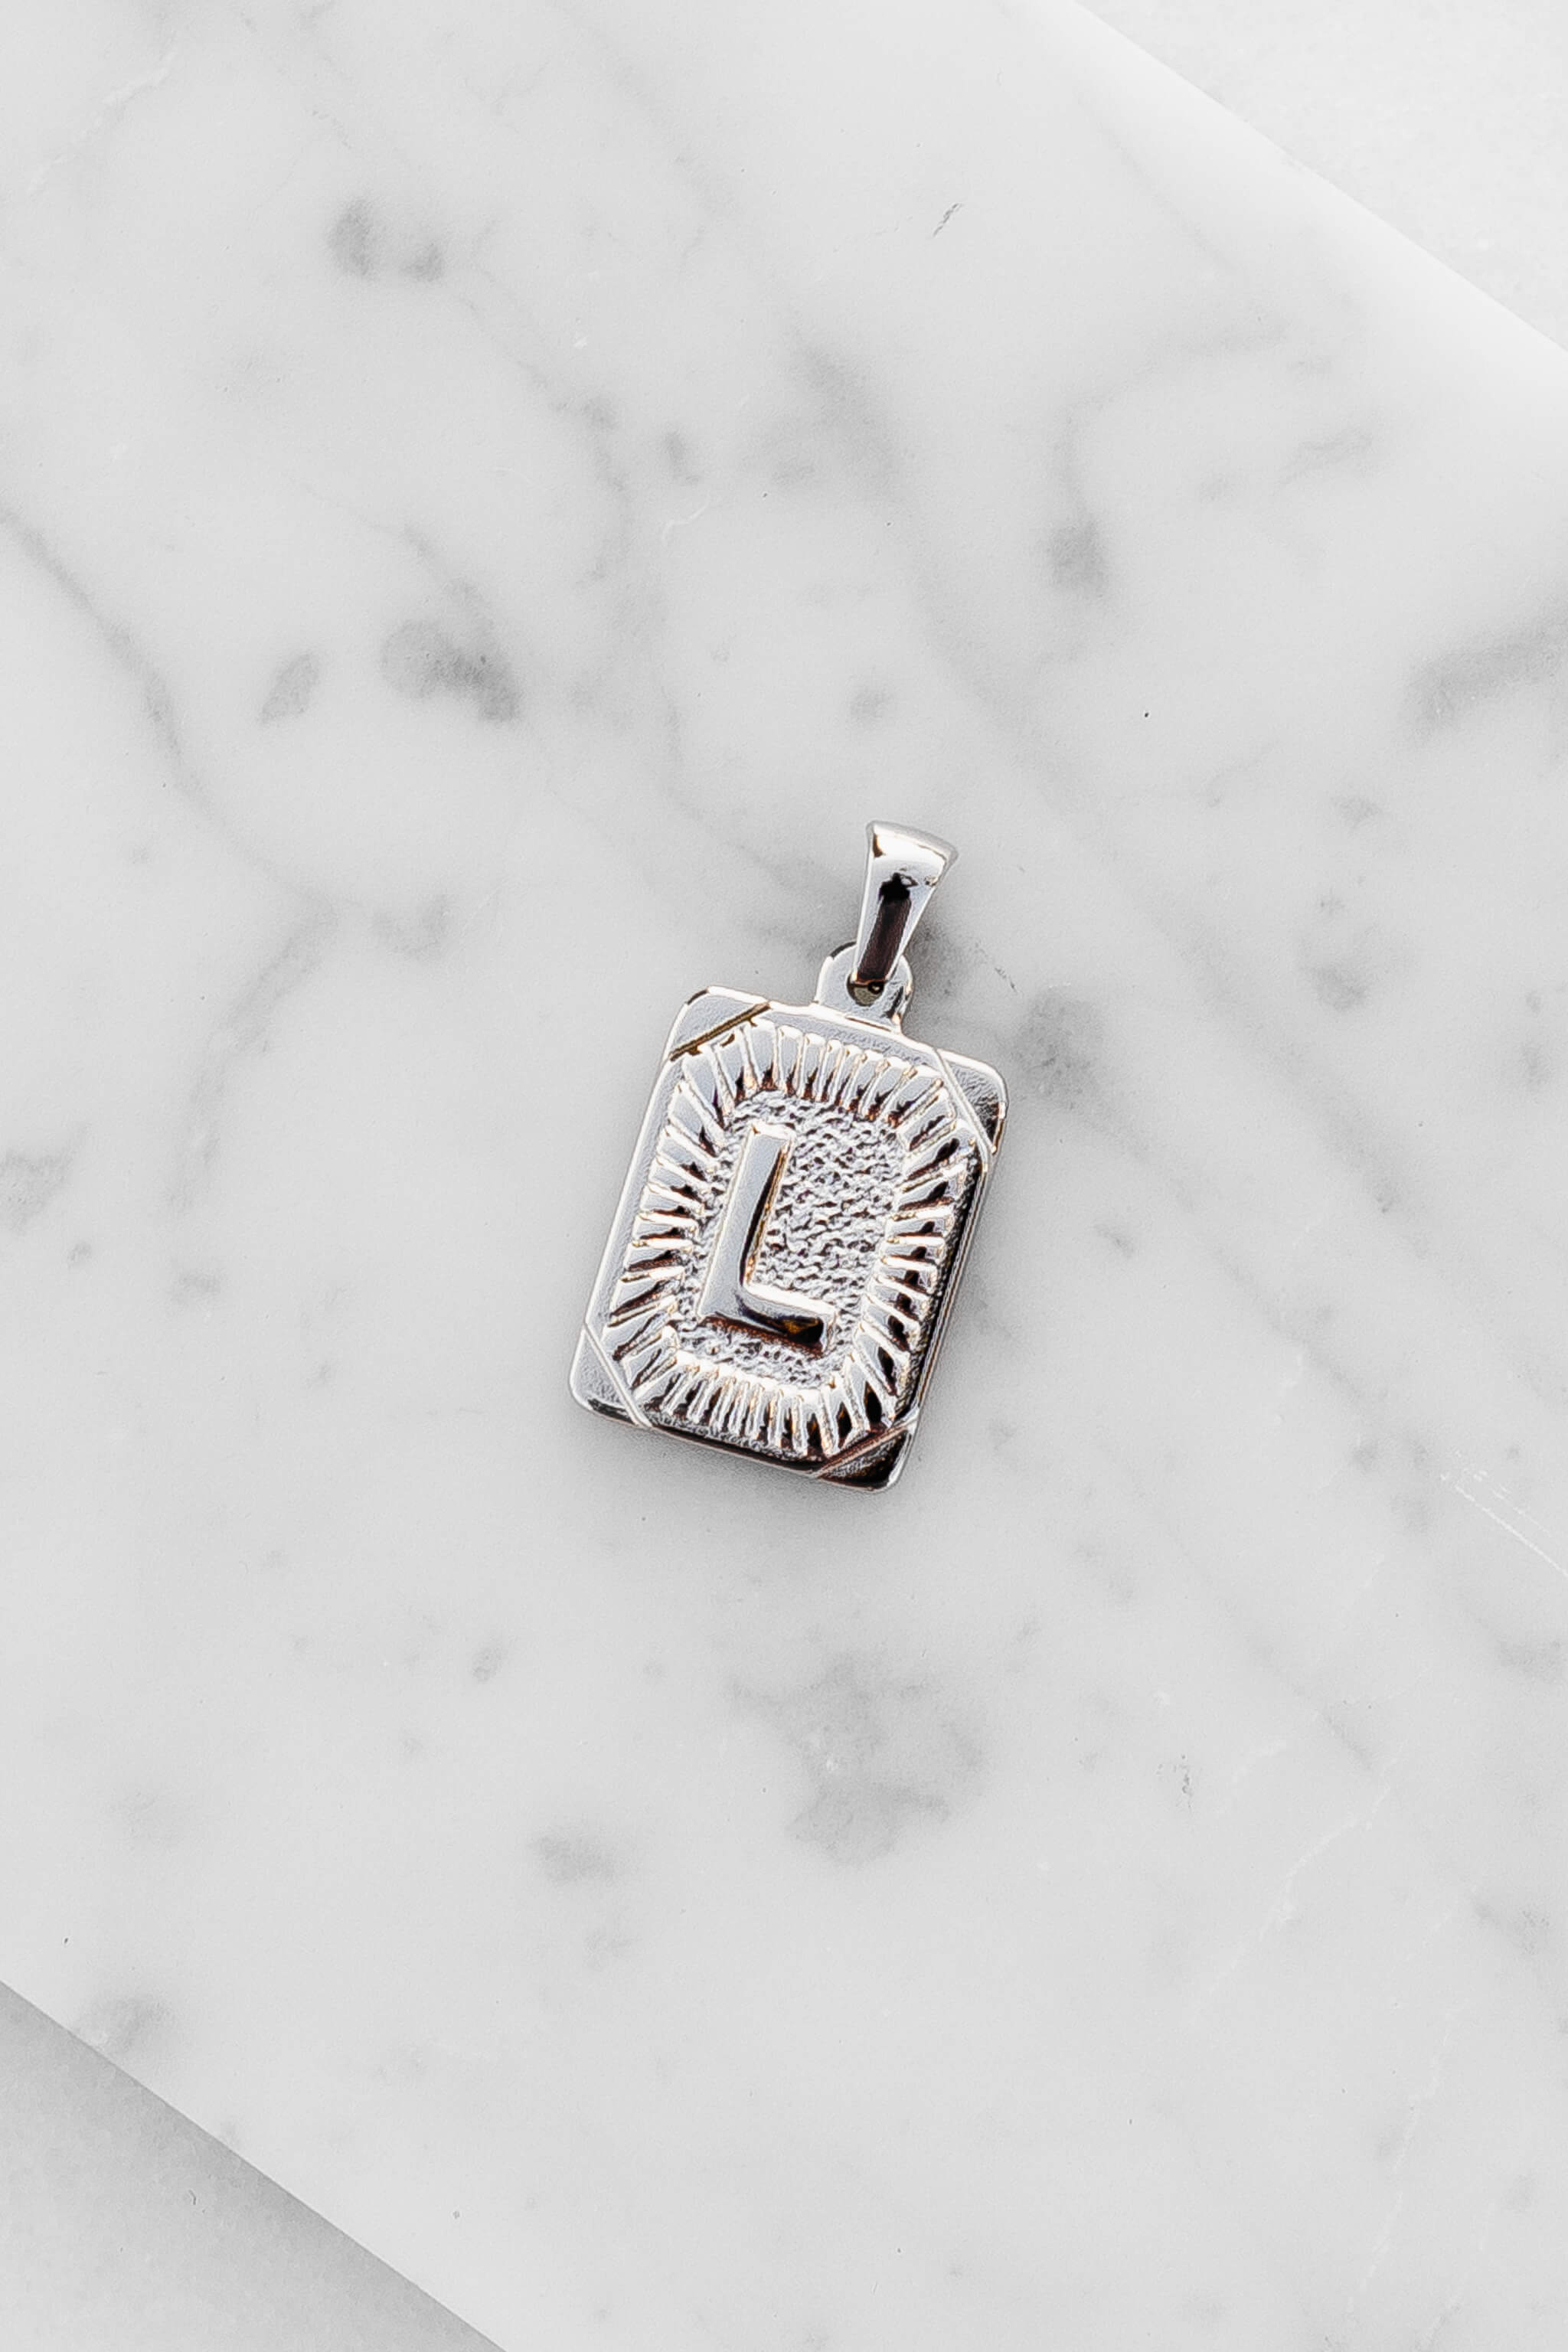 Silver Monogram Letter "L" Charm laying on a marble